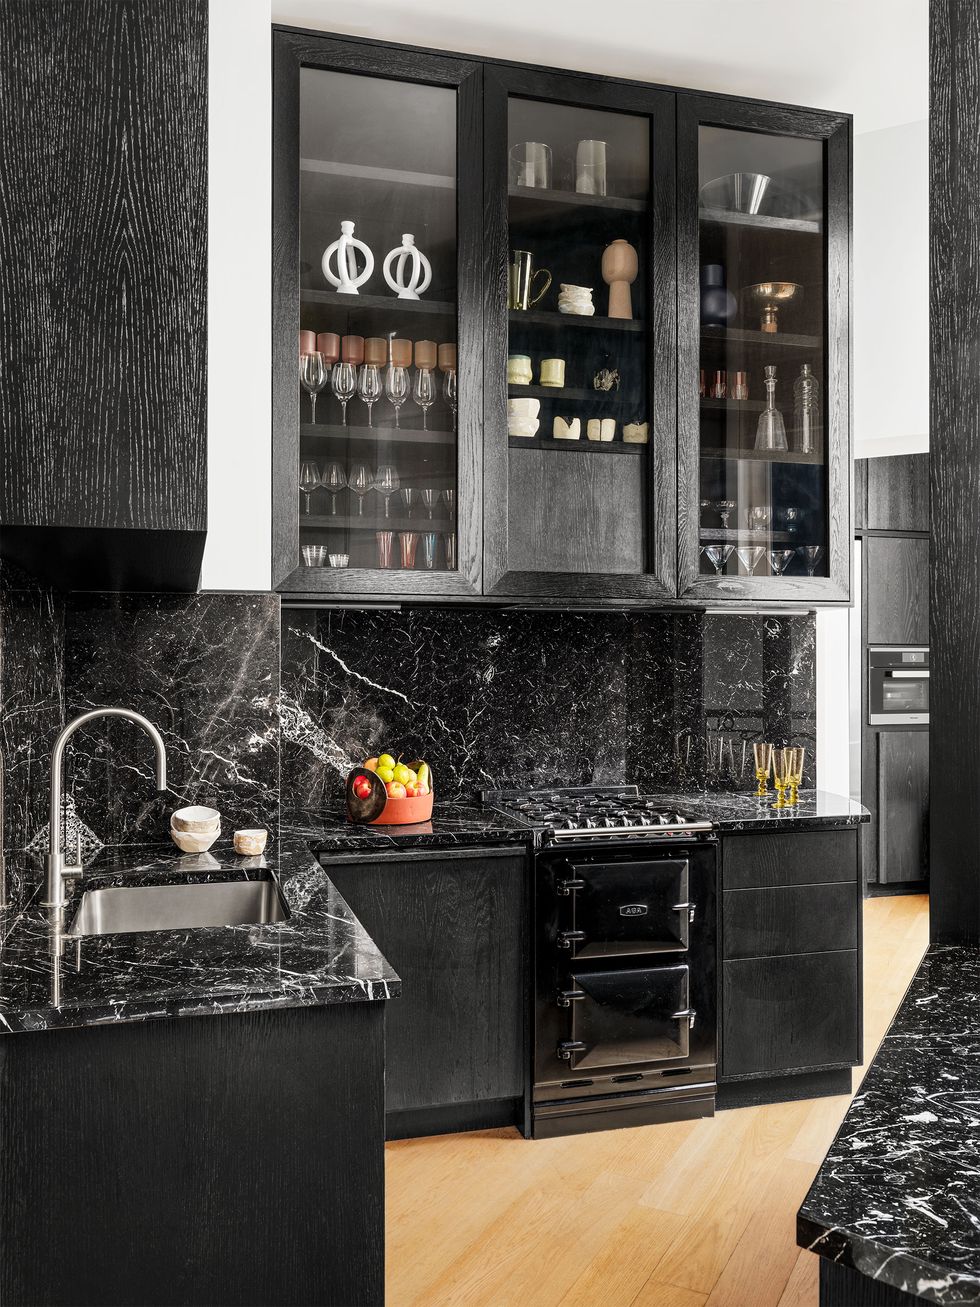 a kitchen has black lower cabinets topped with white veined black marble and upper cabinets with glass fronts showing glassware and dishes, stainless steel sink, and planked oak flooring